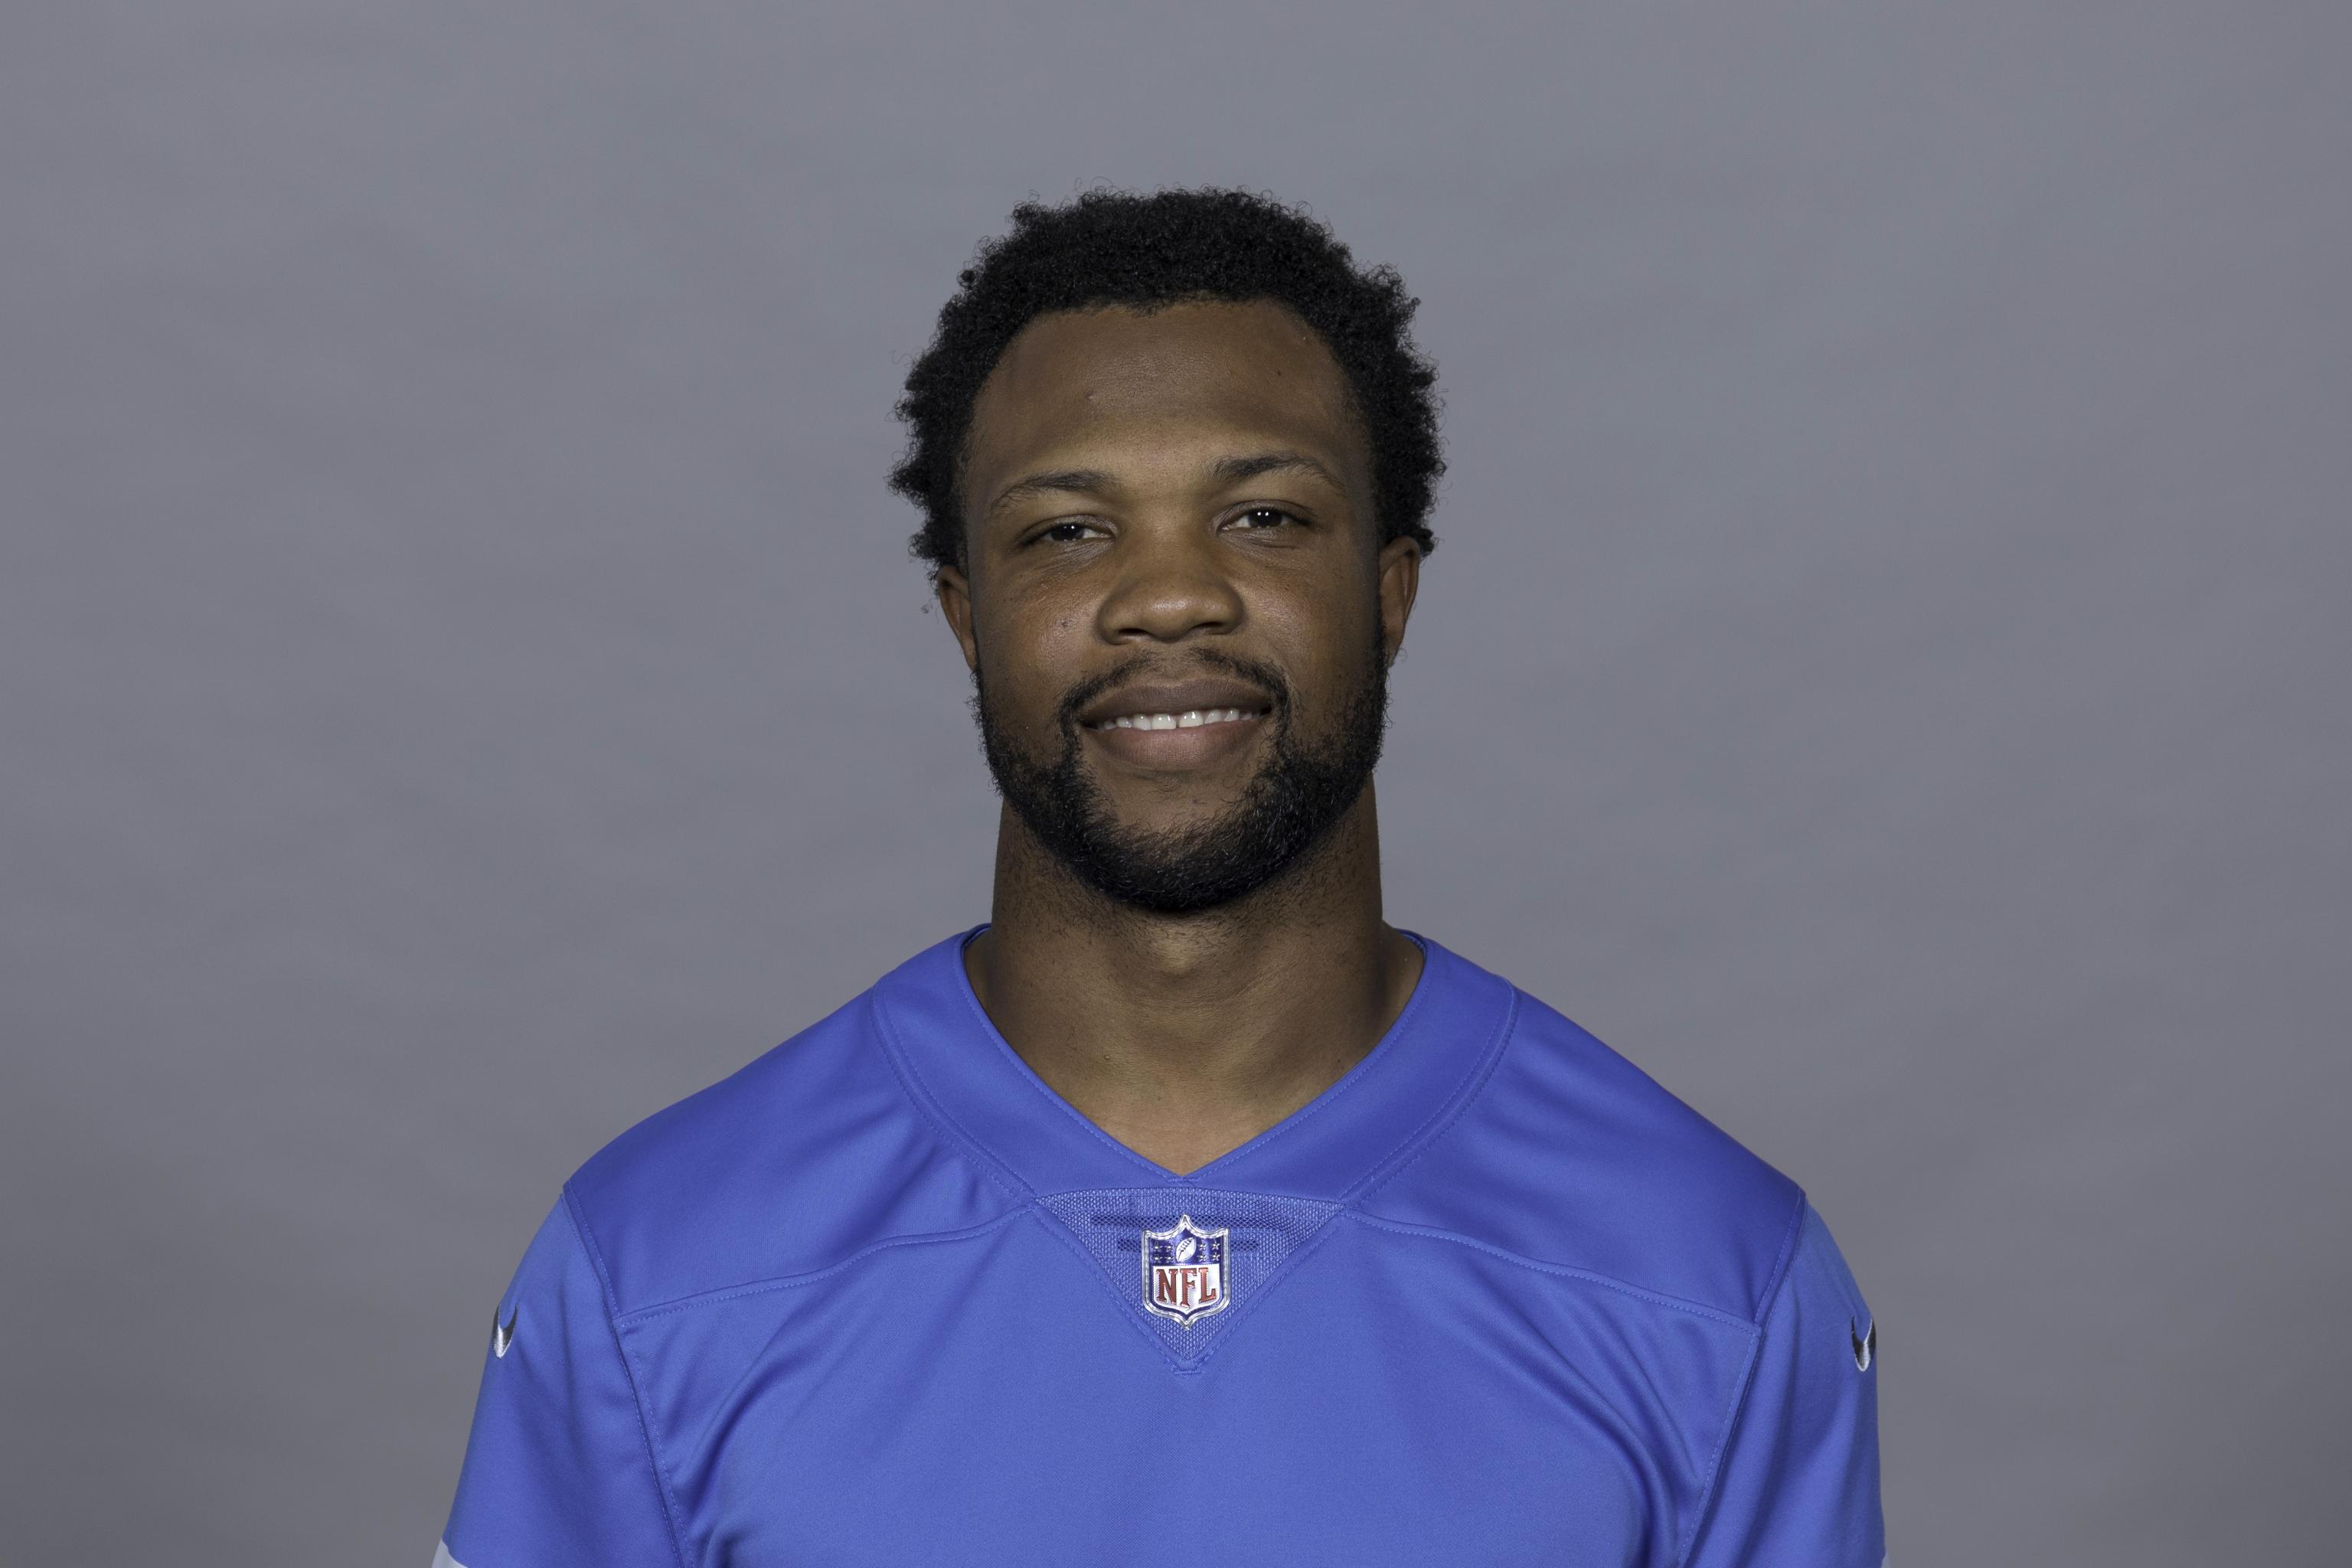 Detroit Lions Player Glover Quin Invests 70% of NFL Salary